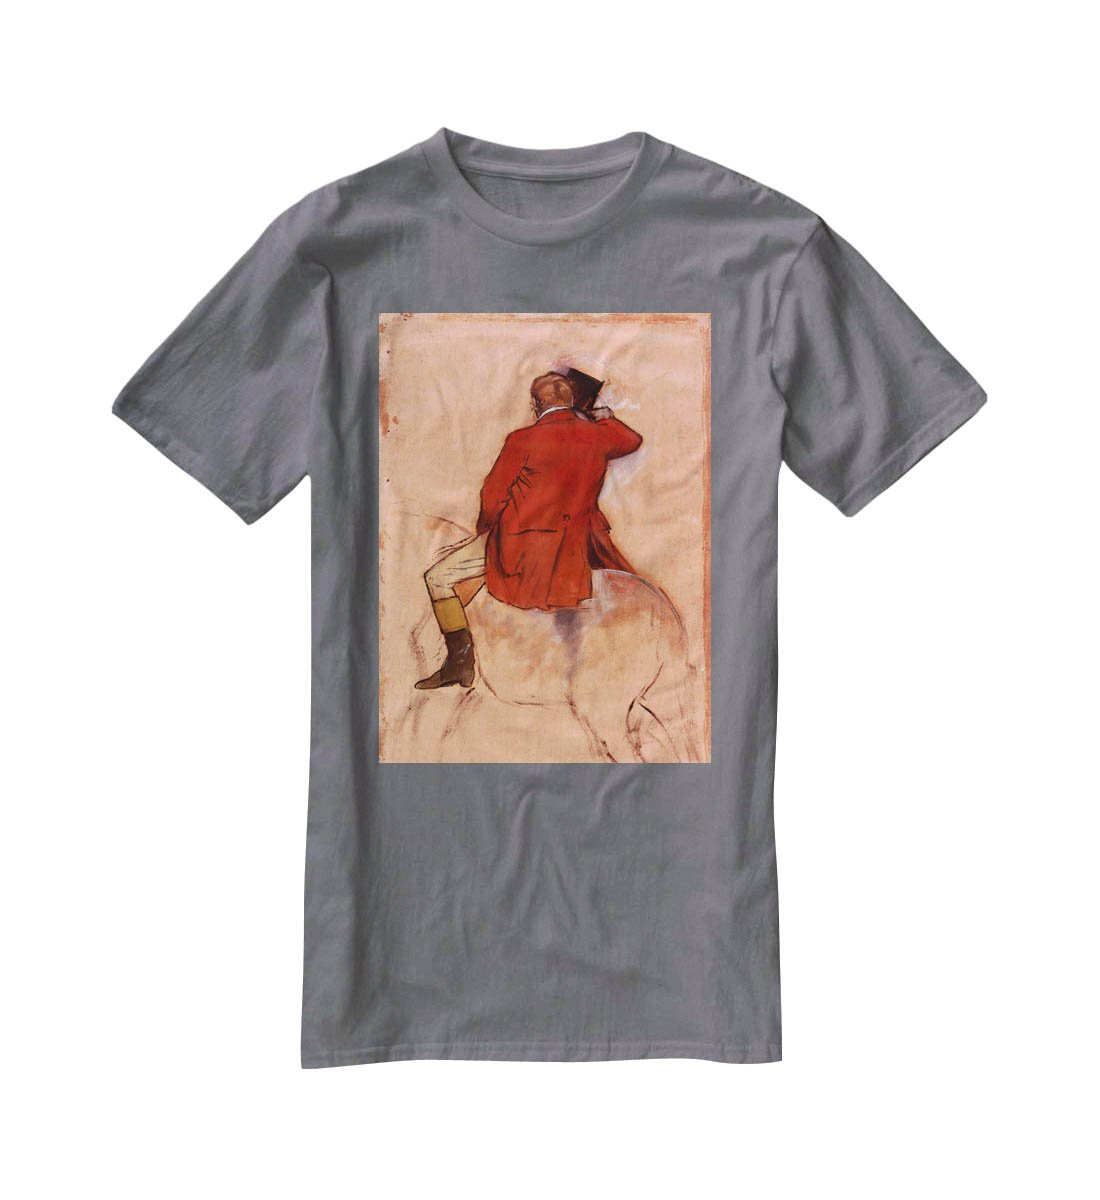 Rider with red jacket by Degas T-Shirt - Canvas Art Rocks - 3